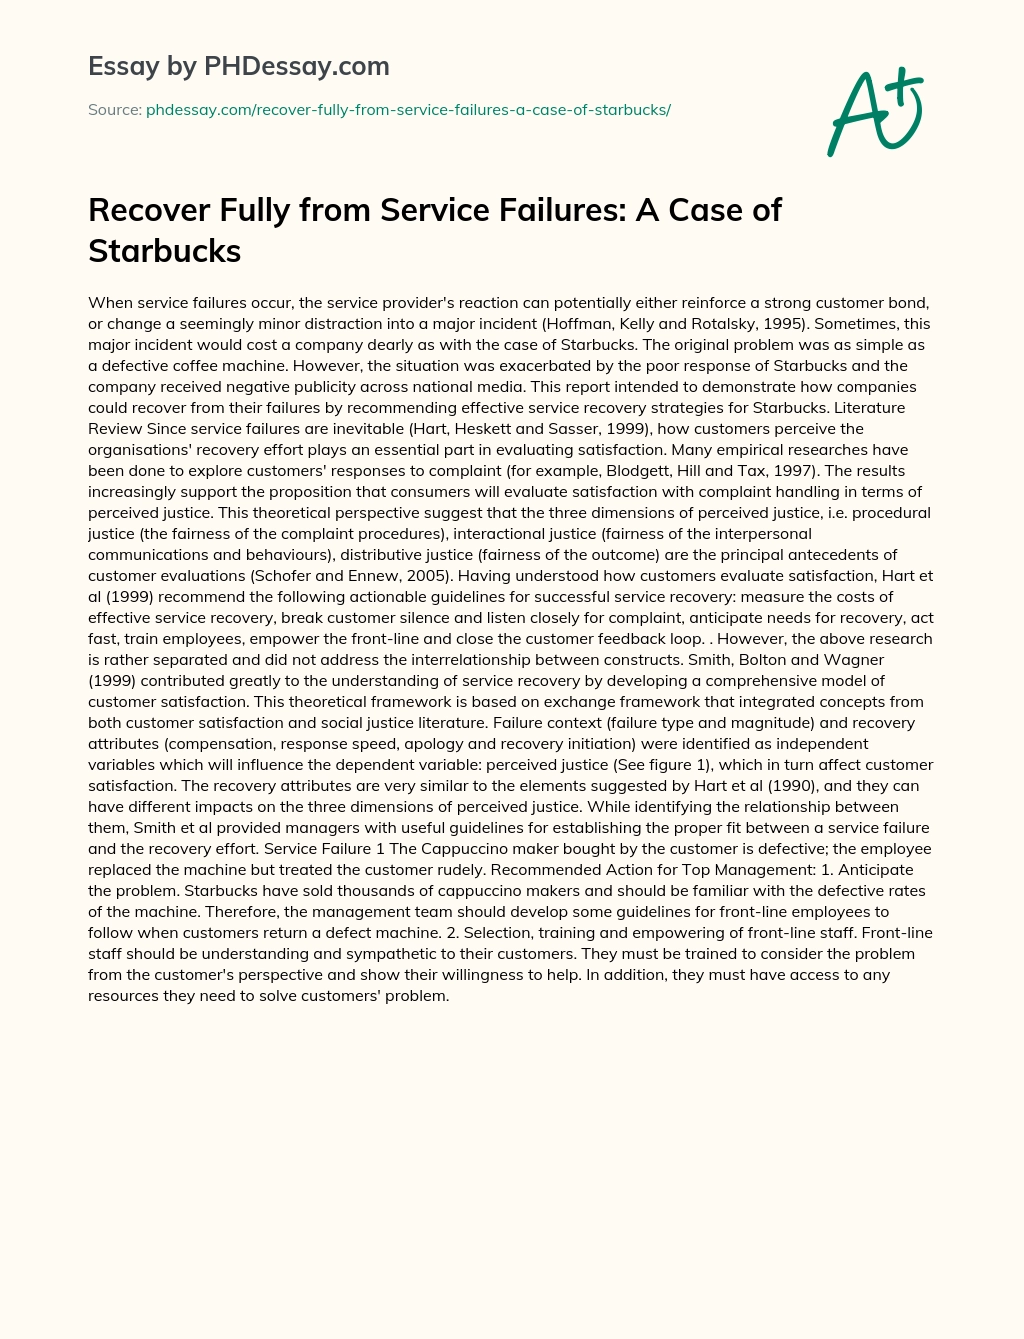 Recover Fully from Service Failures: A Case of Starbucks essay